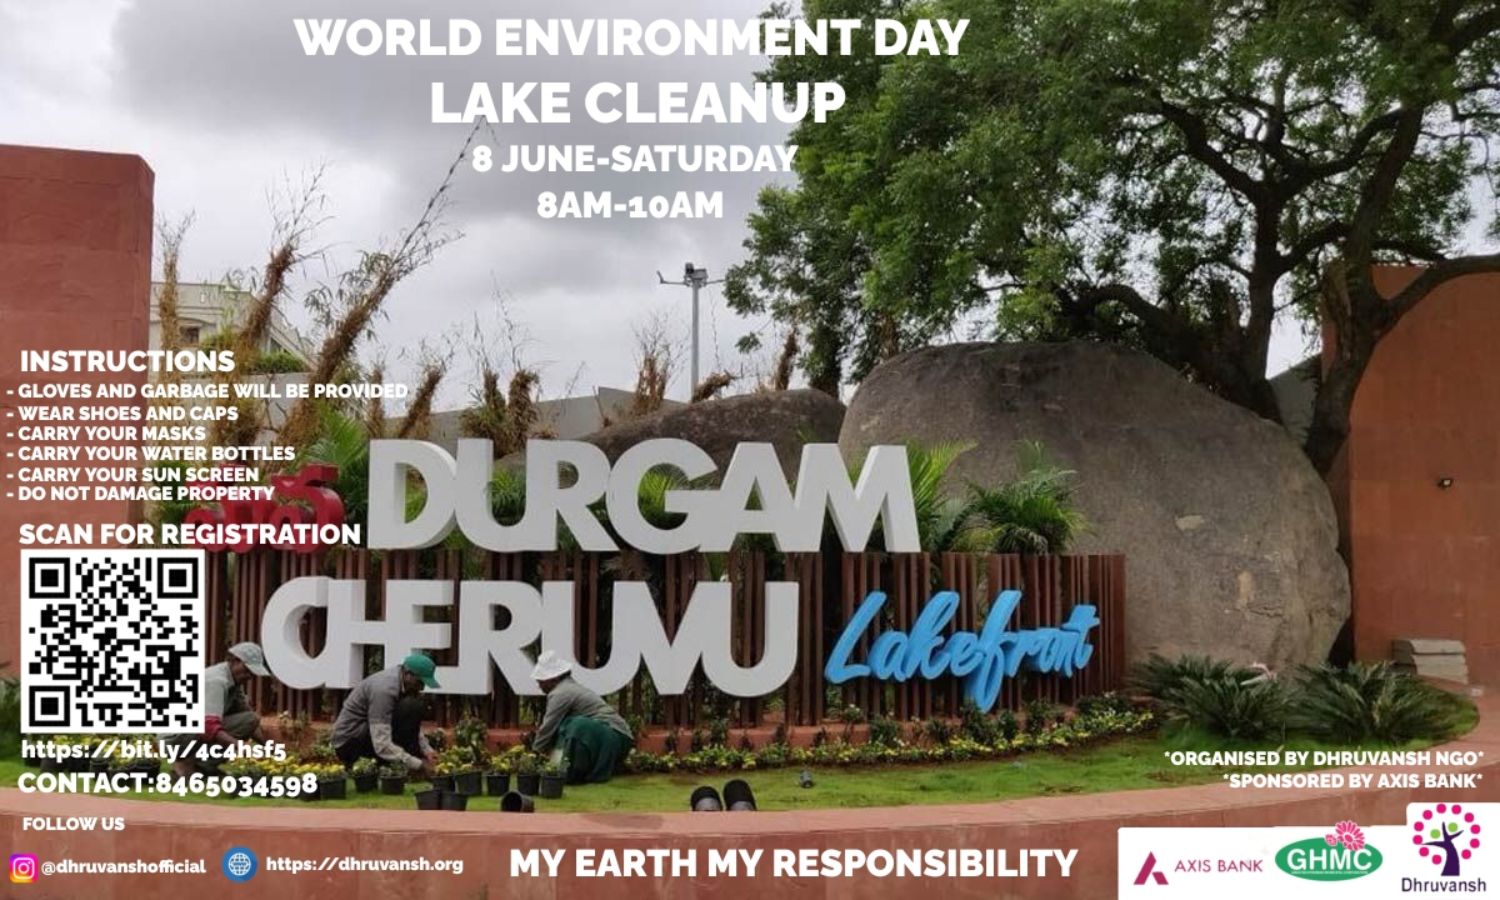 Durgam Cheruvu Lake Cleanup To Be Held On June 8